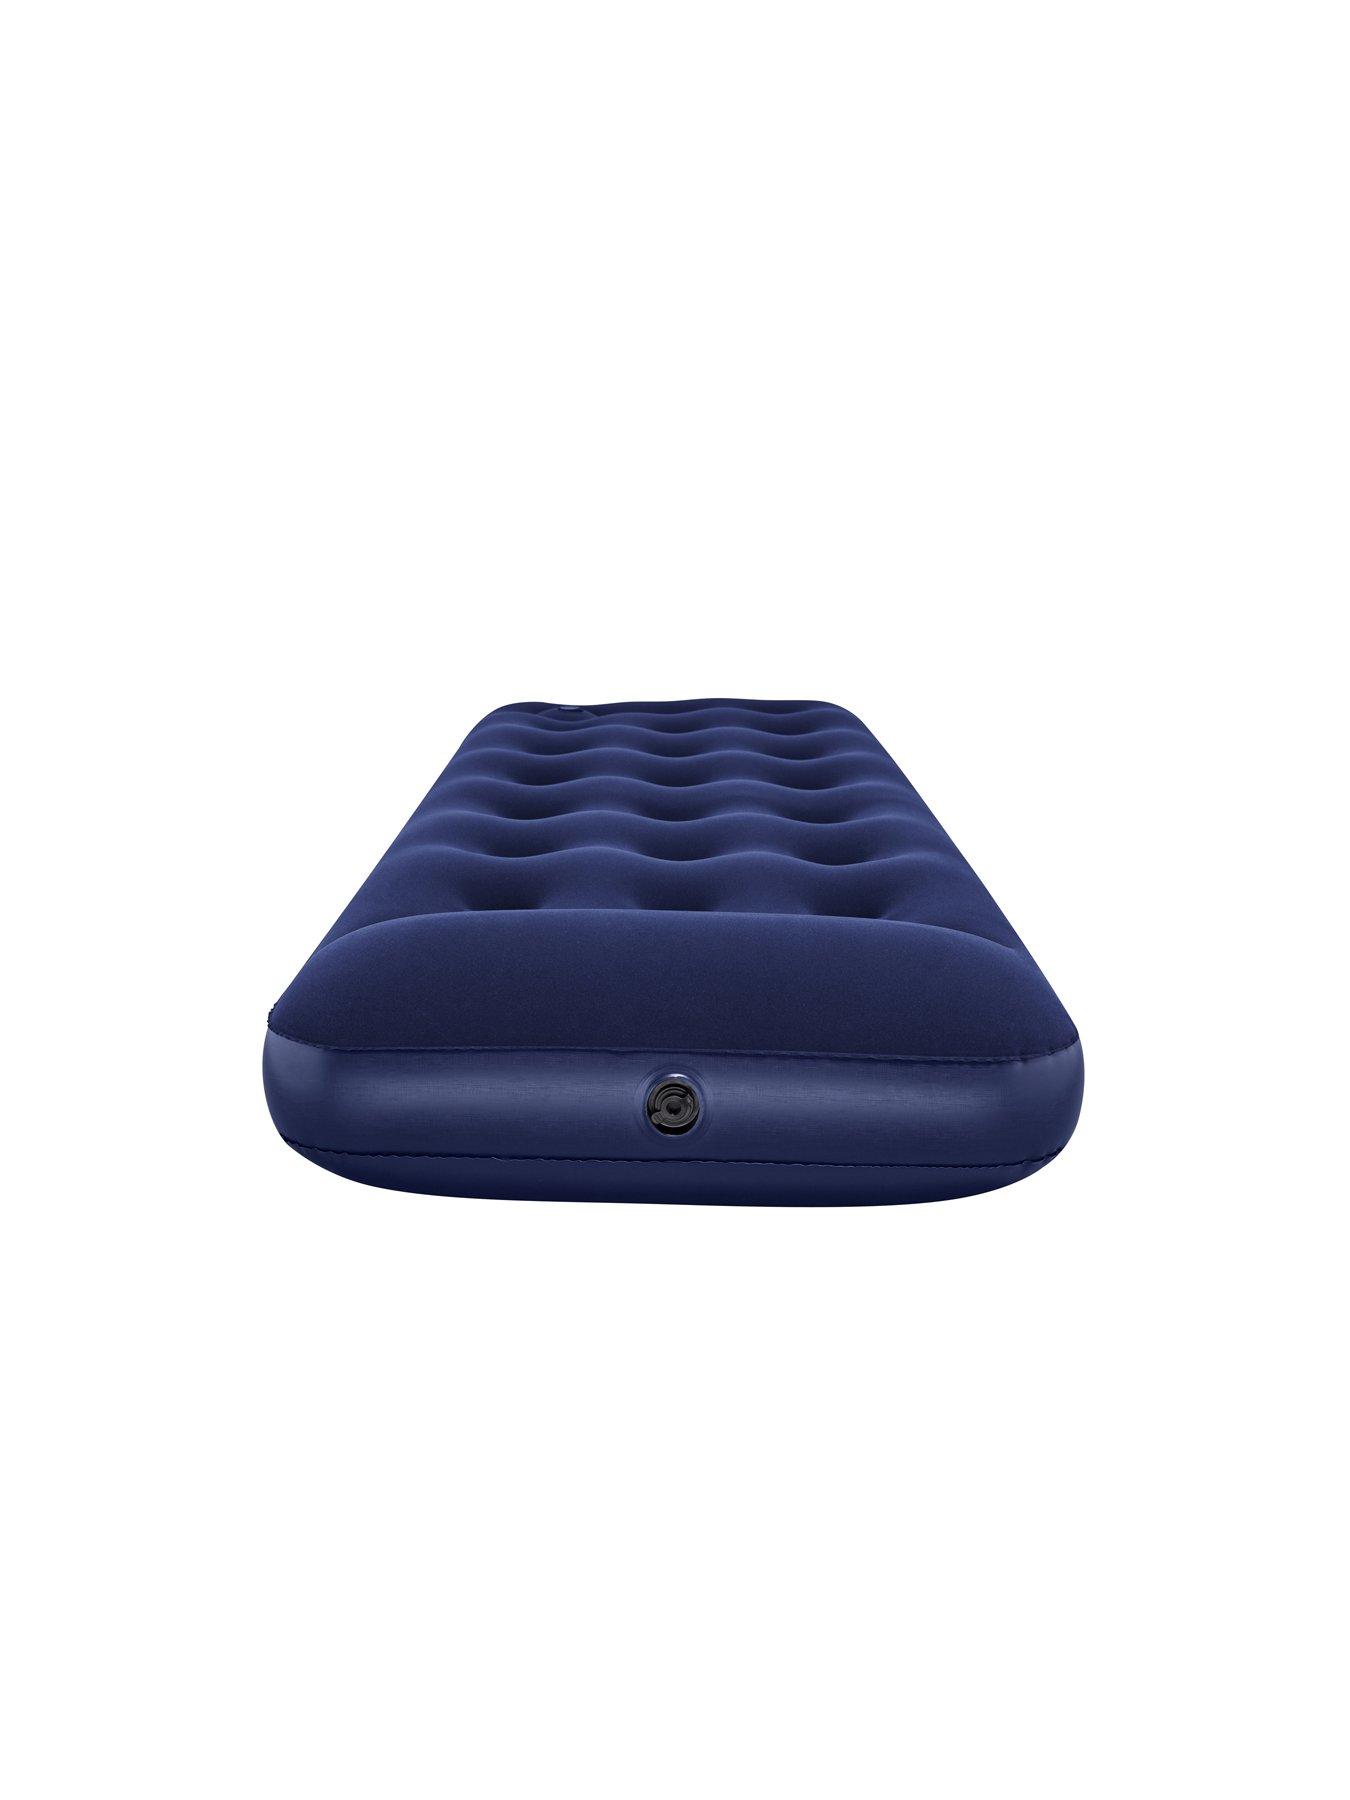 Bestway Premium Flocked Single Inflatable Air Bed Mattress with AC Pump